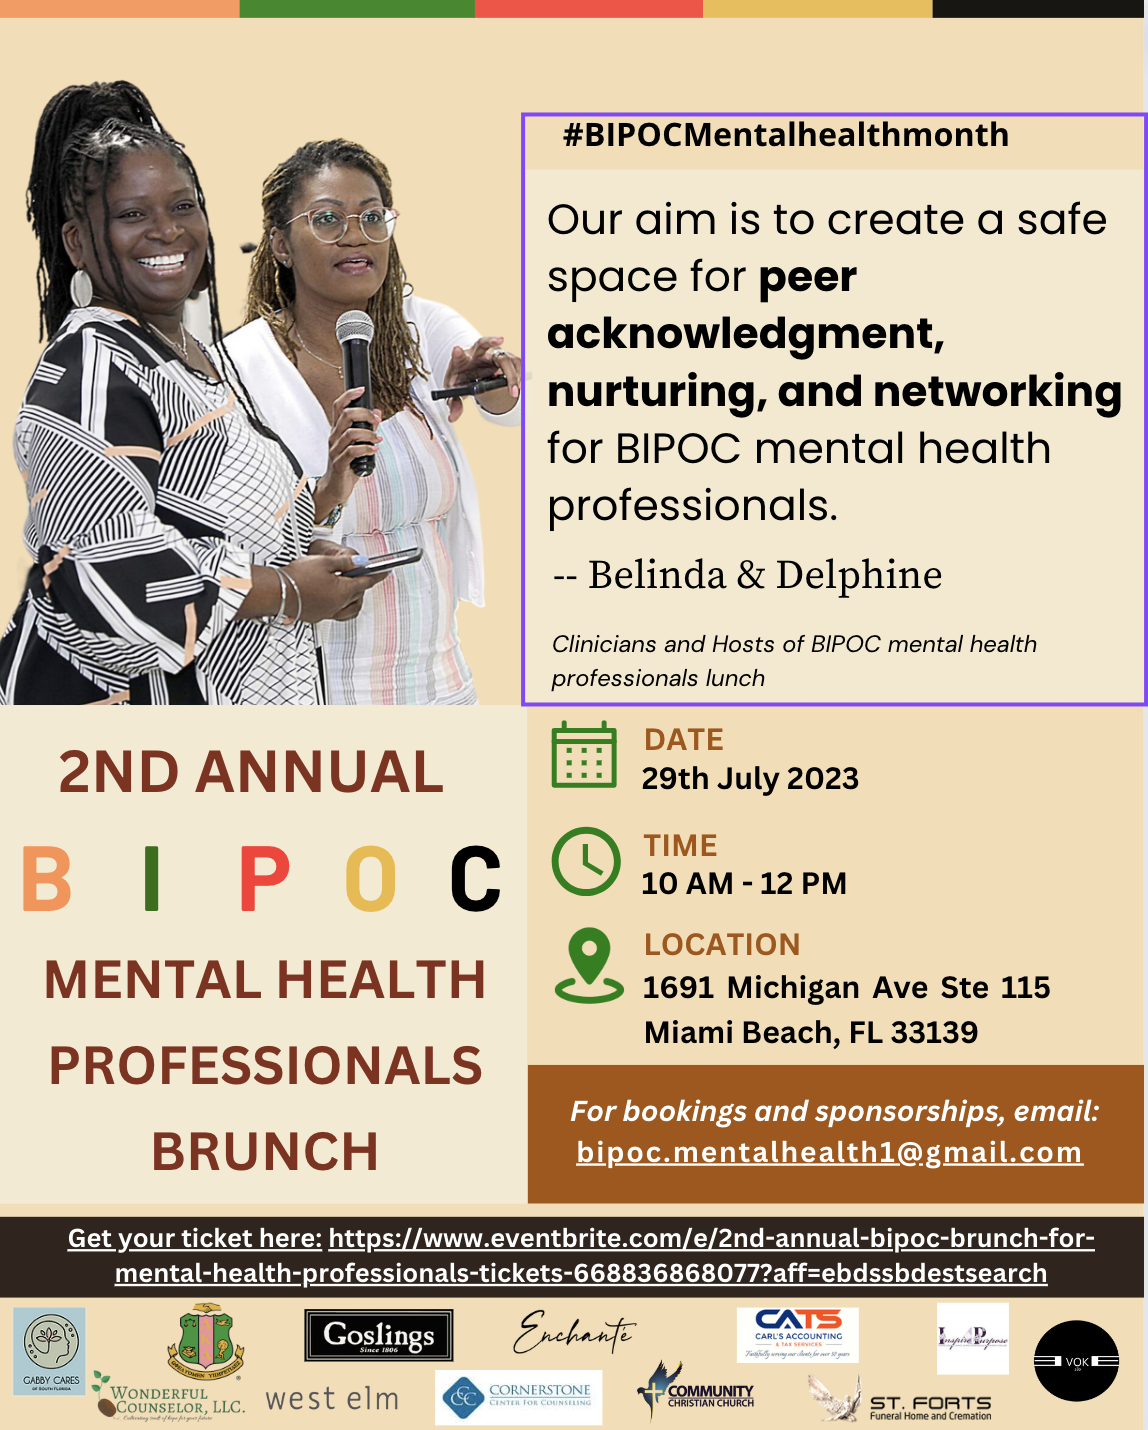 2nd Annual BIPOC Mental Health Professionals Brunch